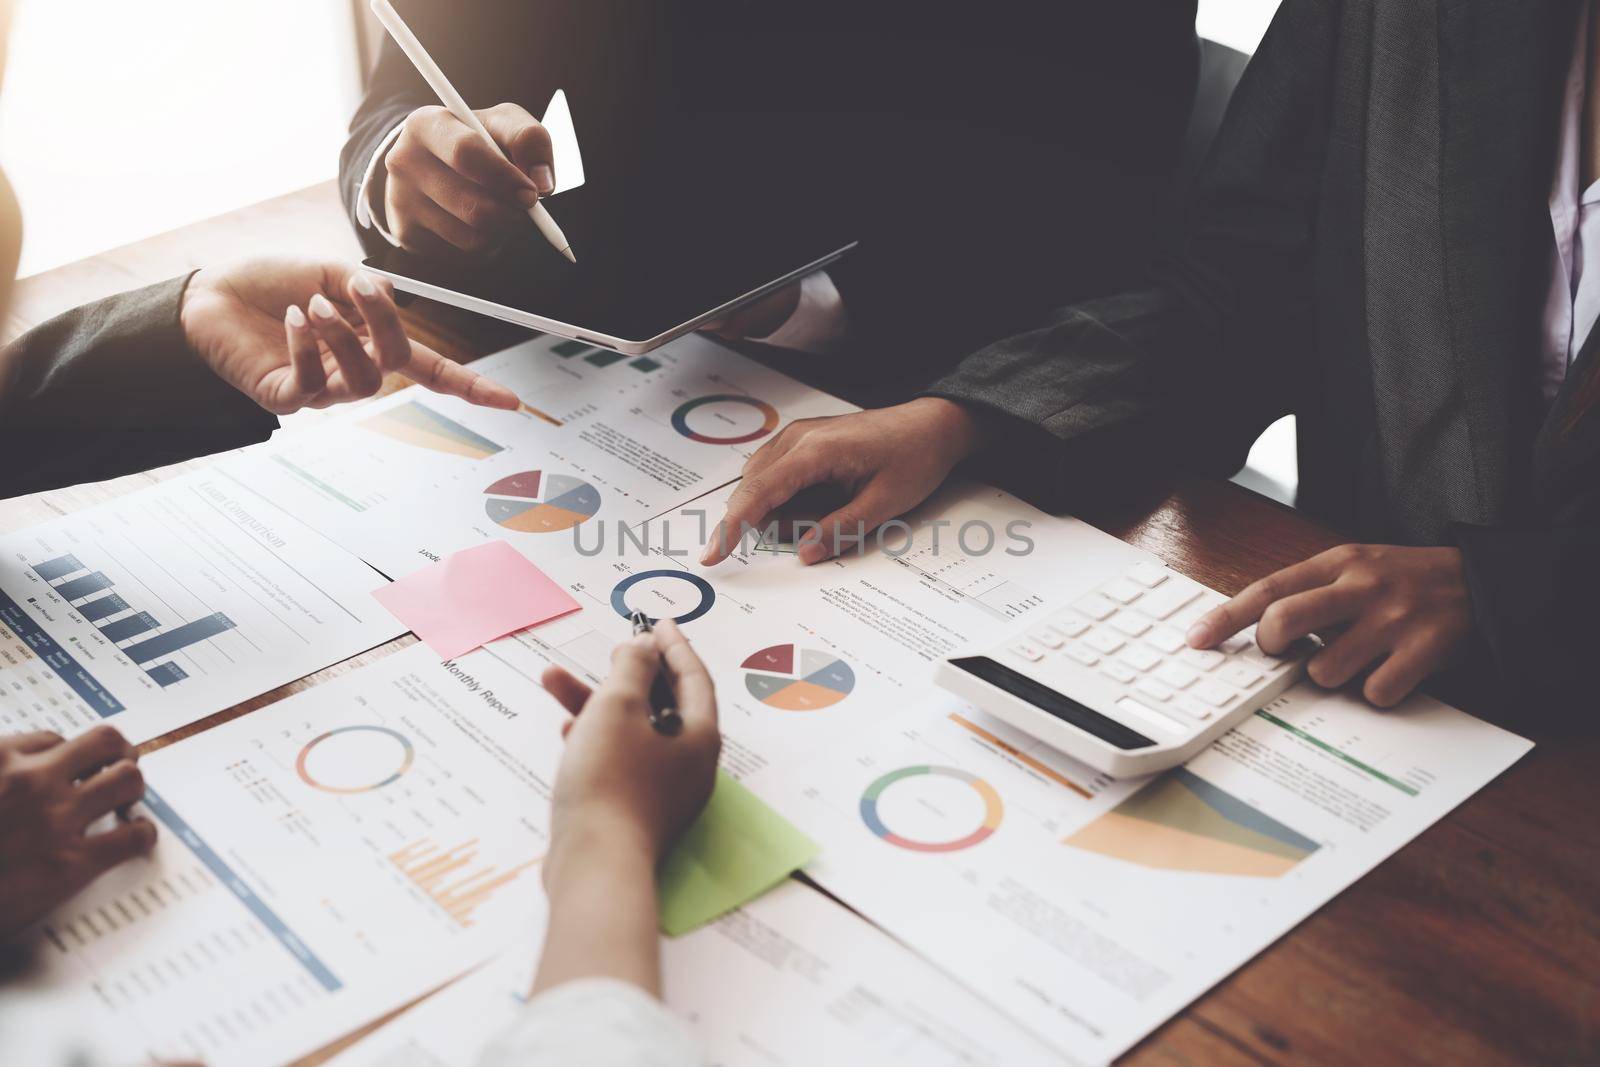 Planning to reduce investment risks, the image of a group of businesspeople working with partners is adjusting marketing strategies to analyze profitable and targeted customer needs at meetings.